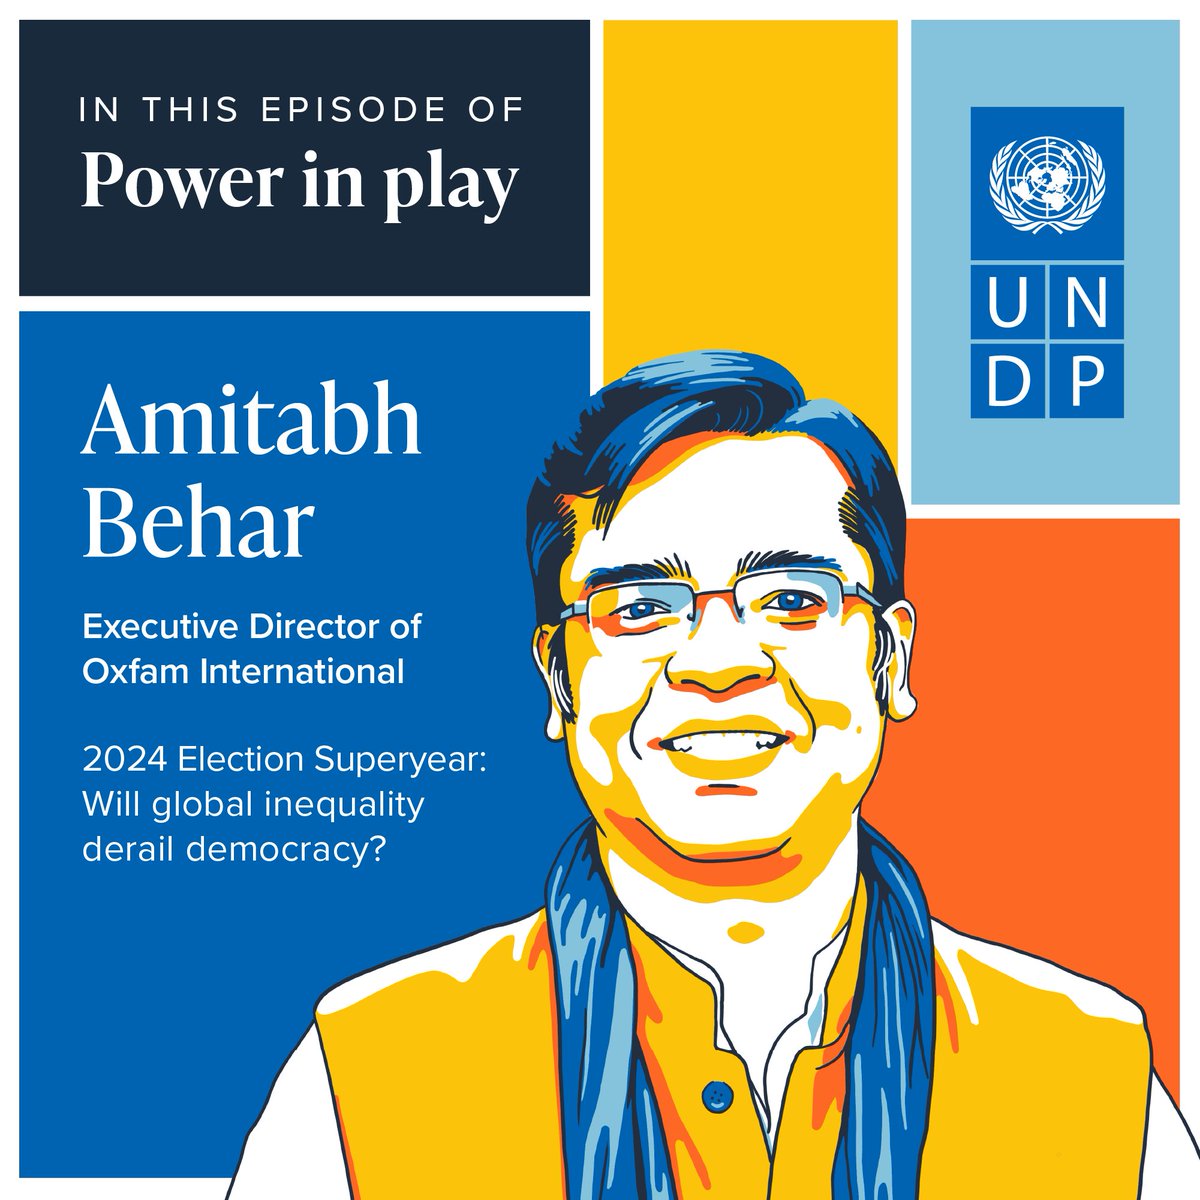 @UNDPOGC just launched a new episode of their podcast series #PowerInPlay. @Arvinn Gadgil is joined by Executive Director of @Oxfam, @amitabhbehar, in navigating the relationship between democracy and the soaring global inequality. Have a listen: open.spotify.com/episode/4HQ0P7…